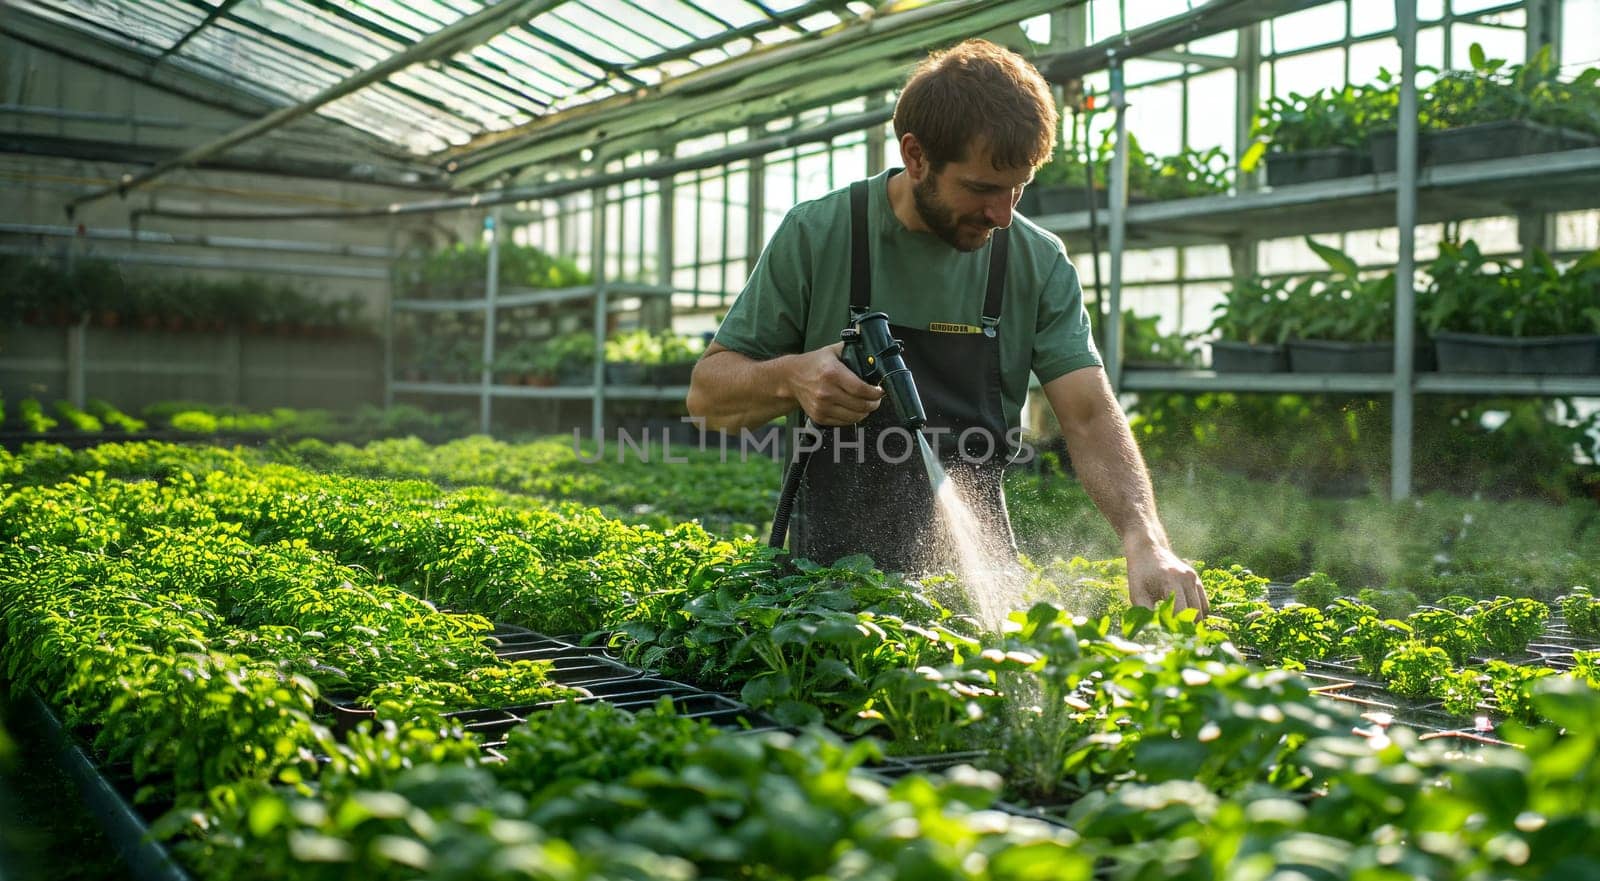 A man in an apron watering plants with a spray gun in a greenhouse